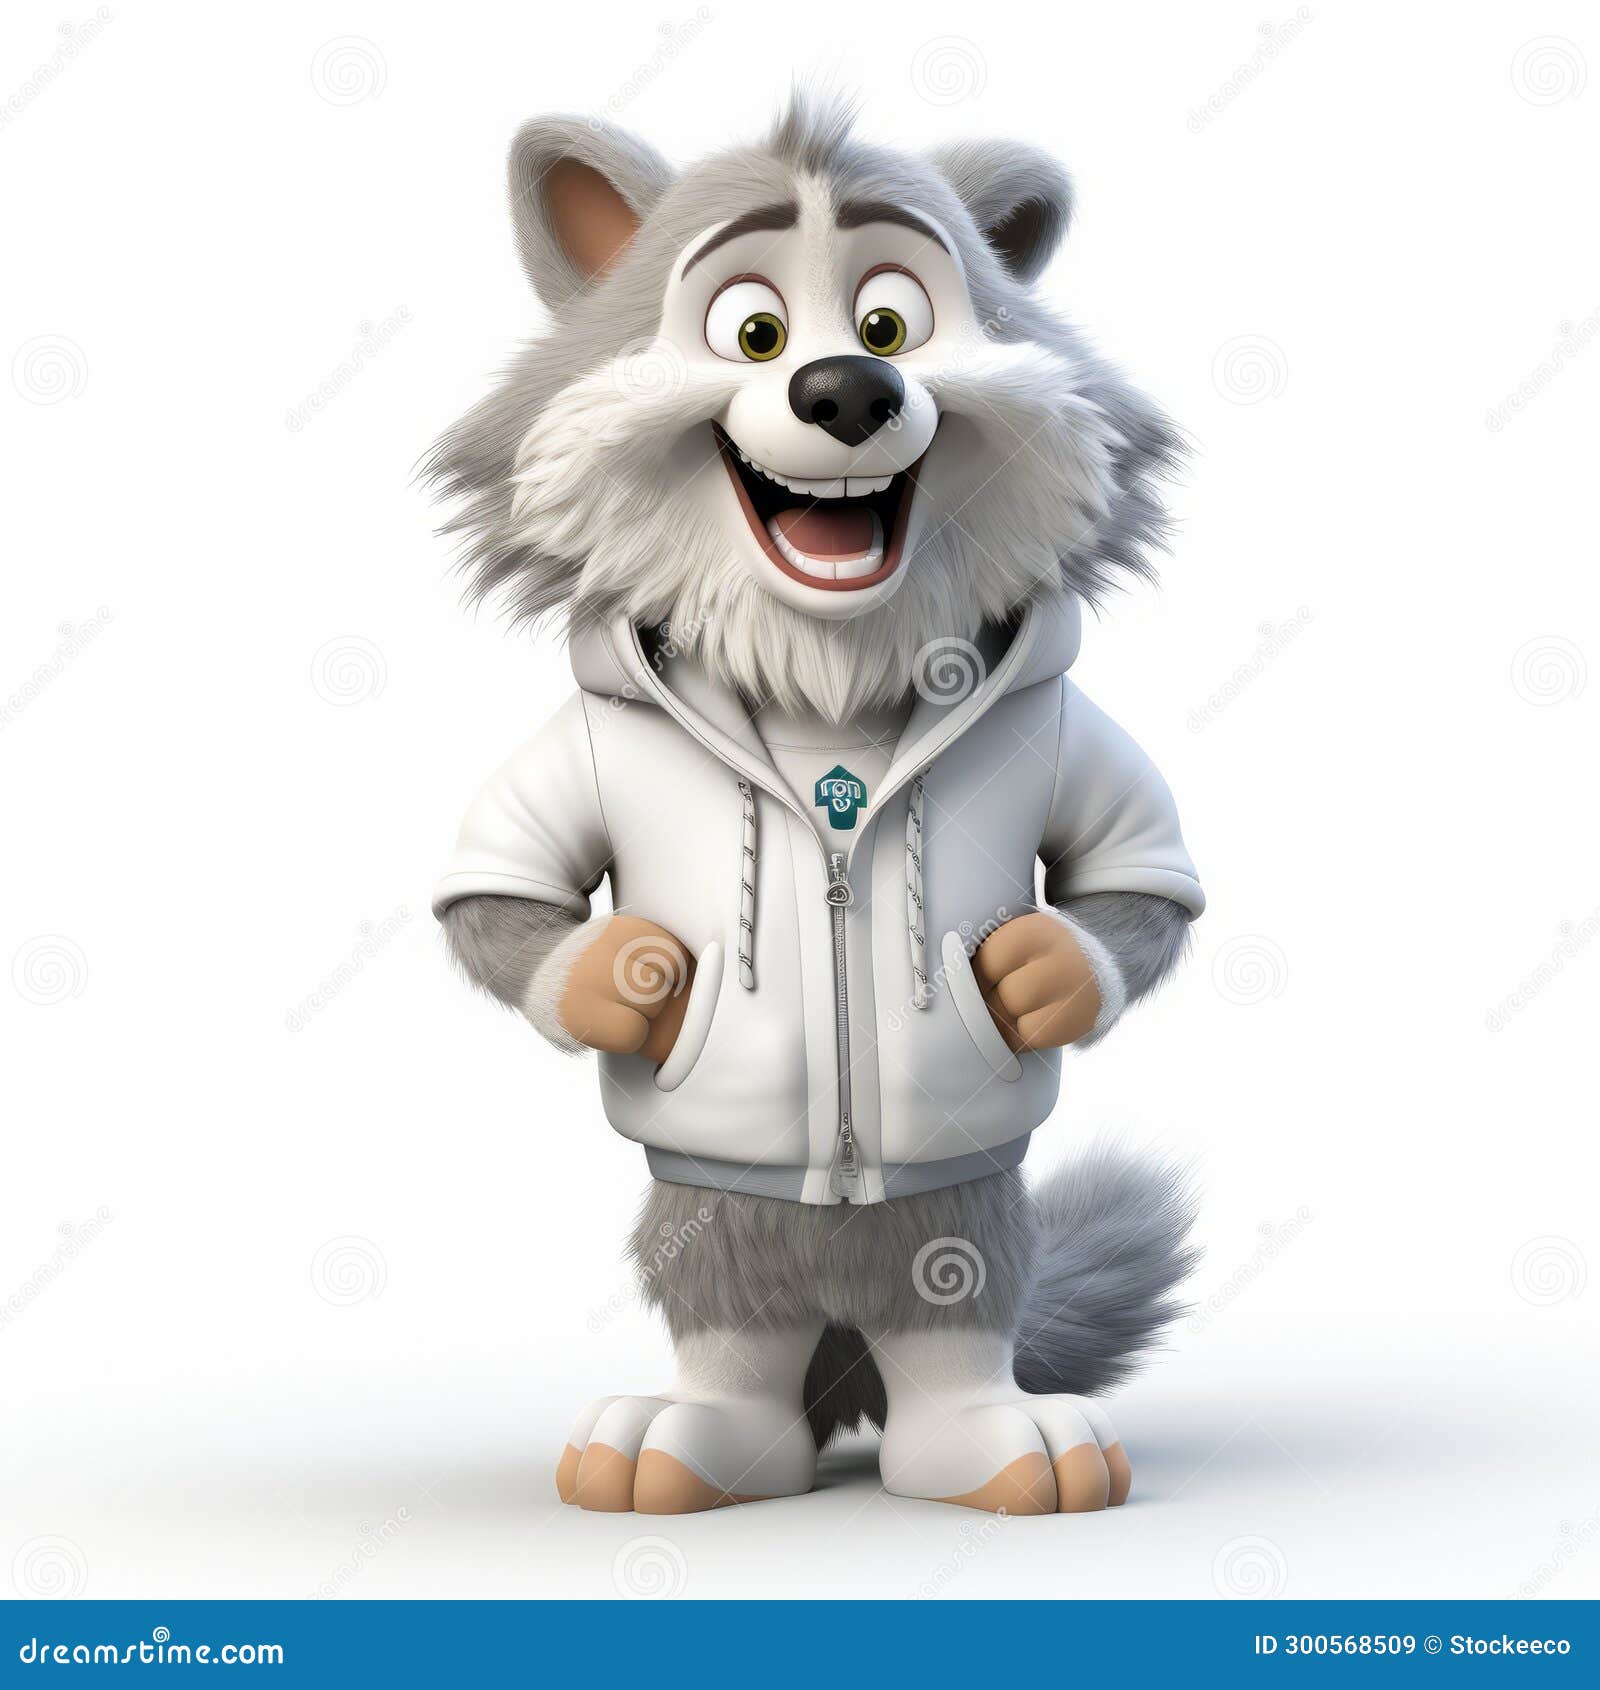 3dskiff character in white hoodie: caninecore hybrid media works